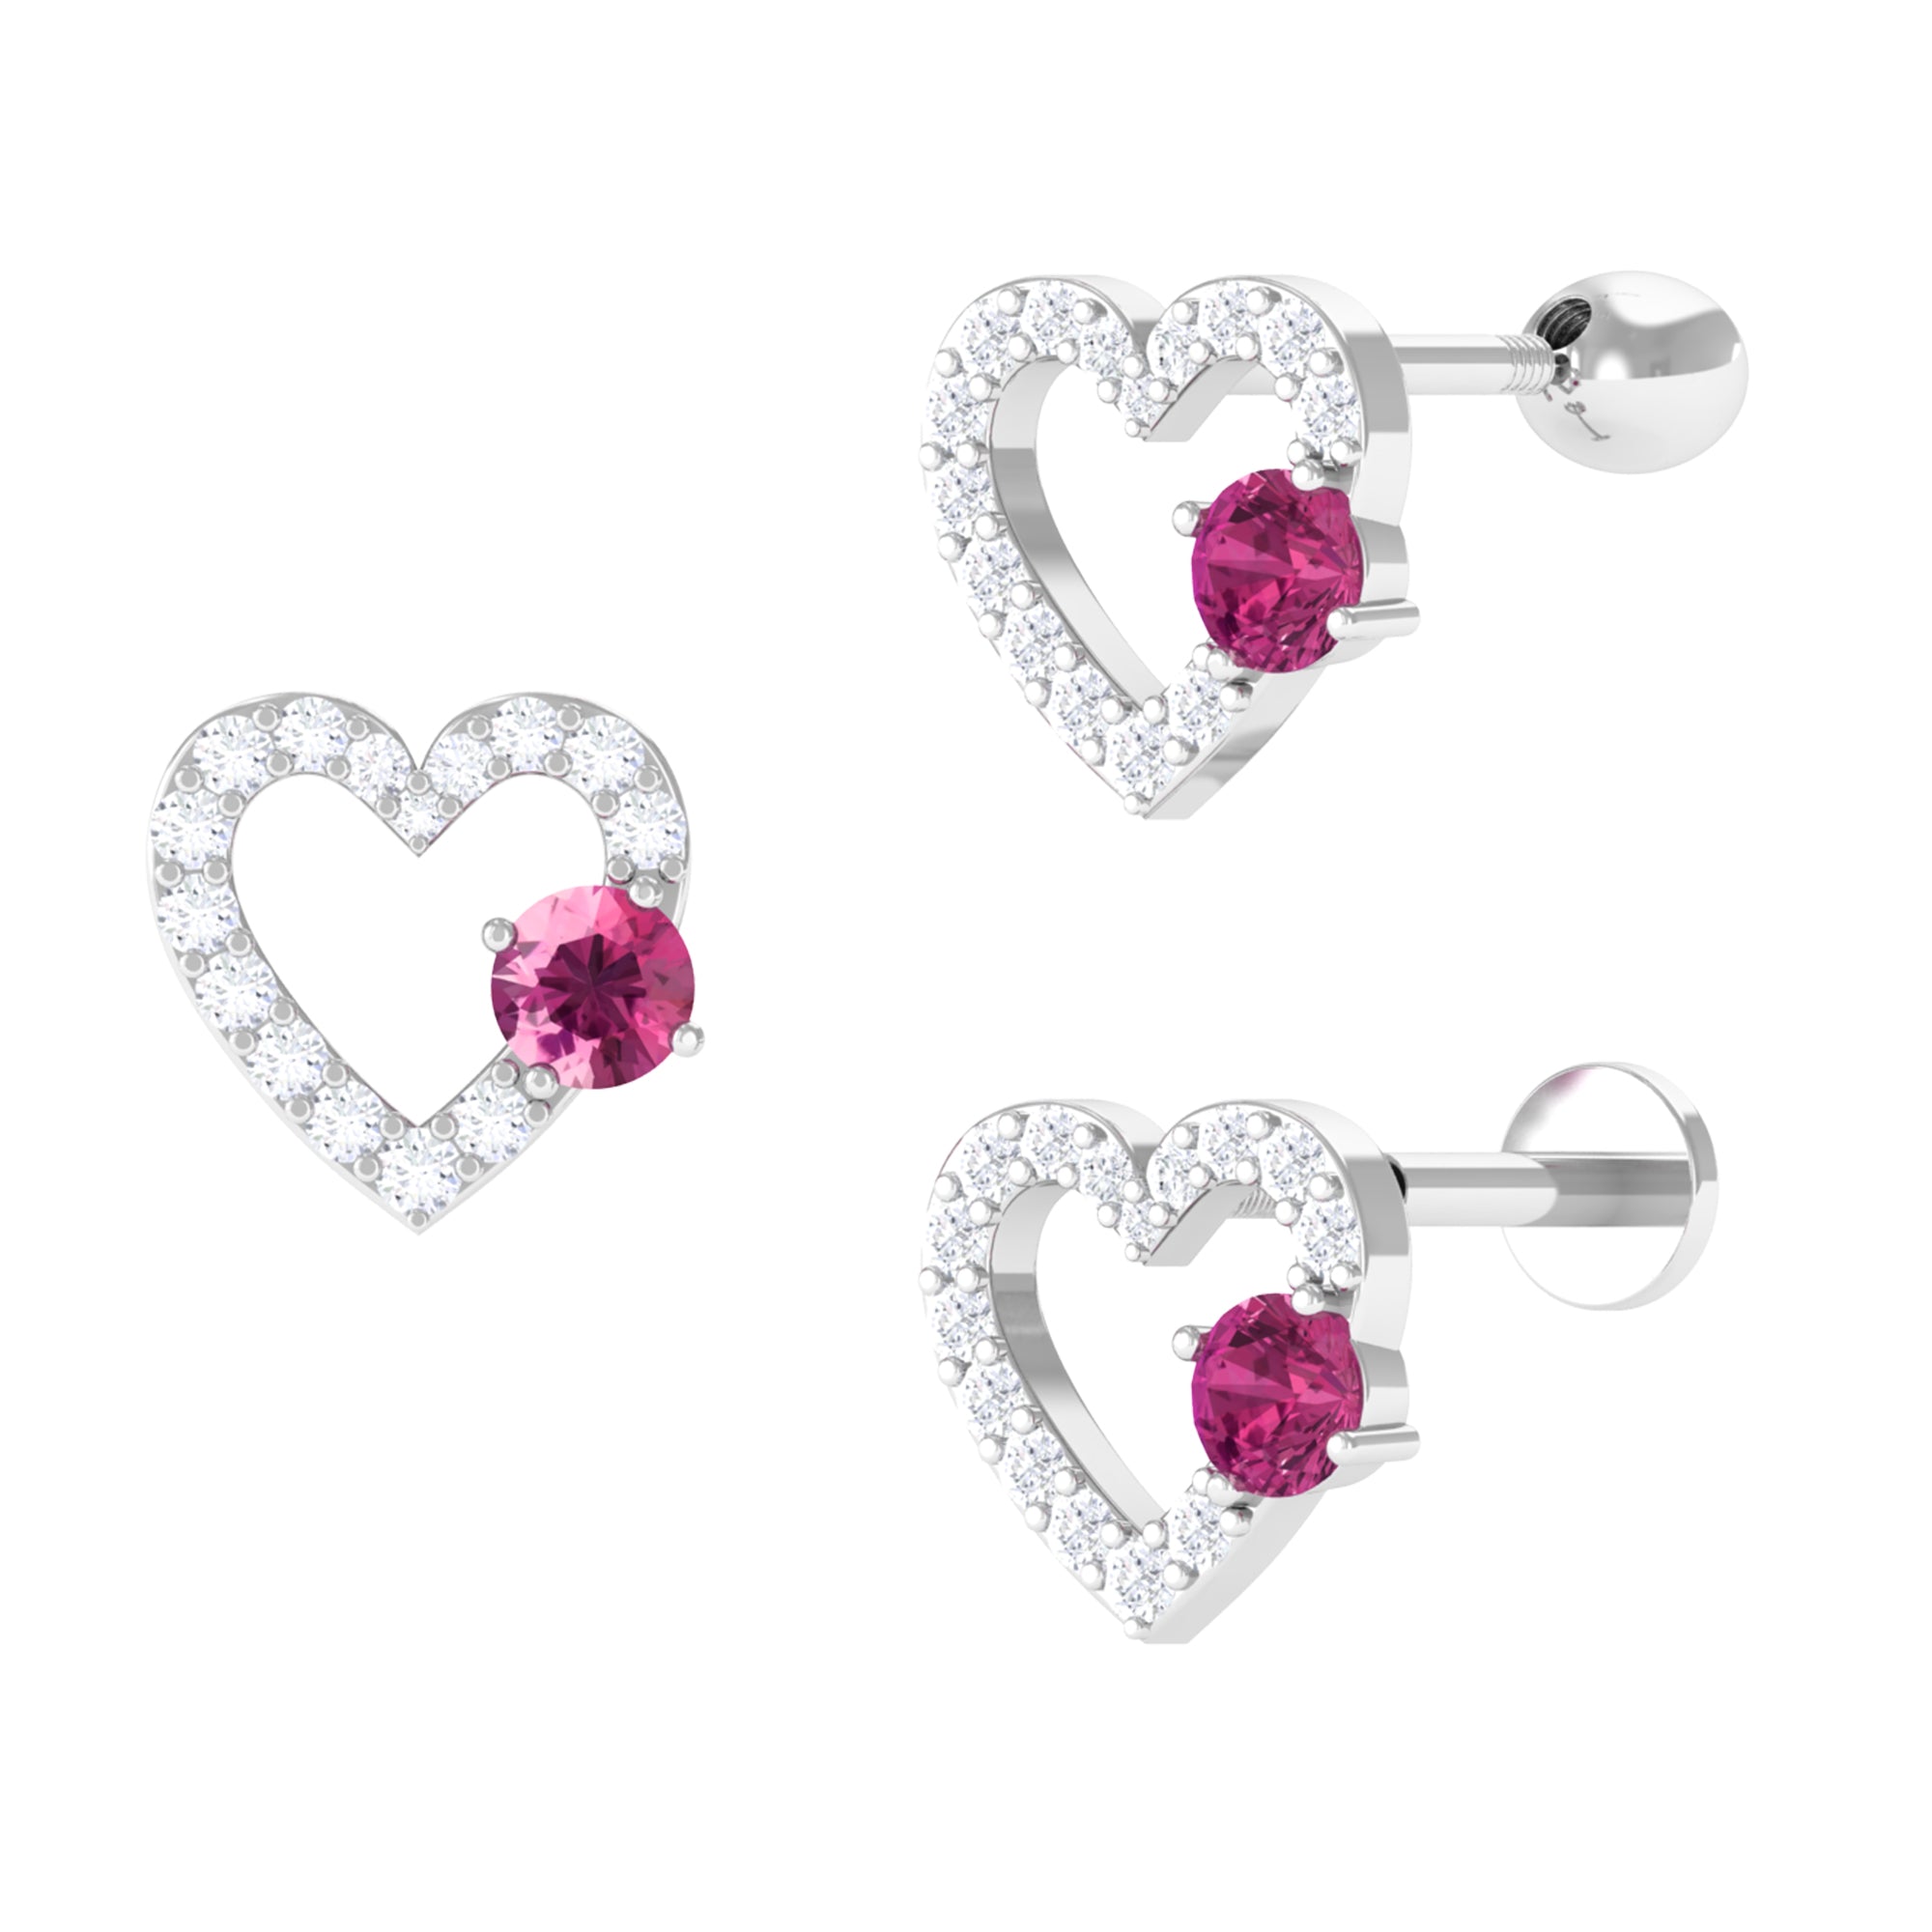 Sparkanite Jewels-Moissanite Heart Helix Earring with Pink Tourmaline